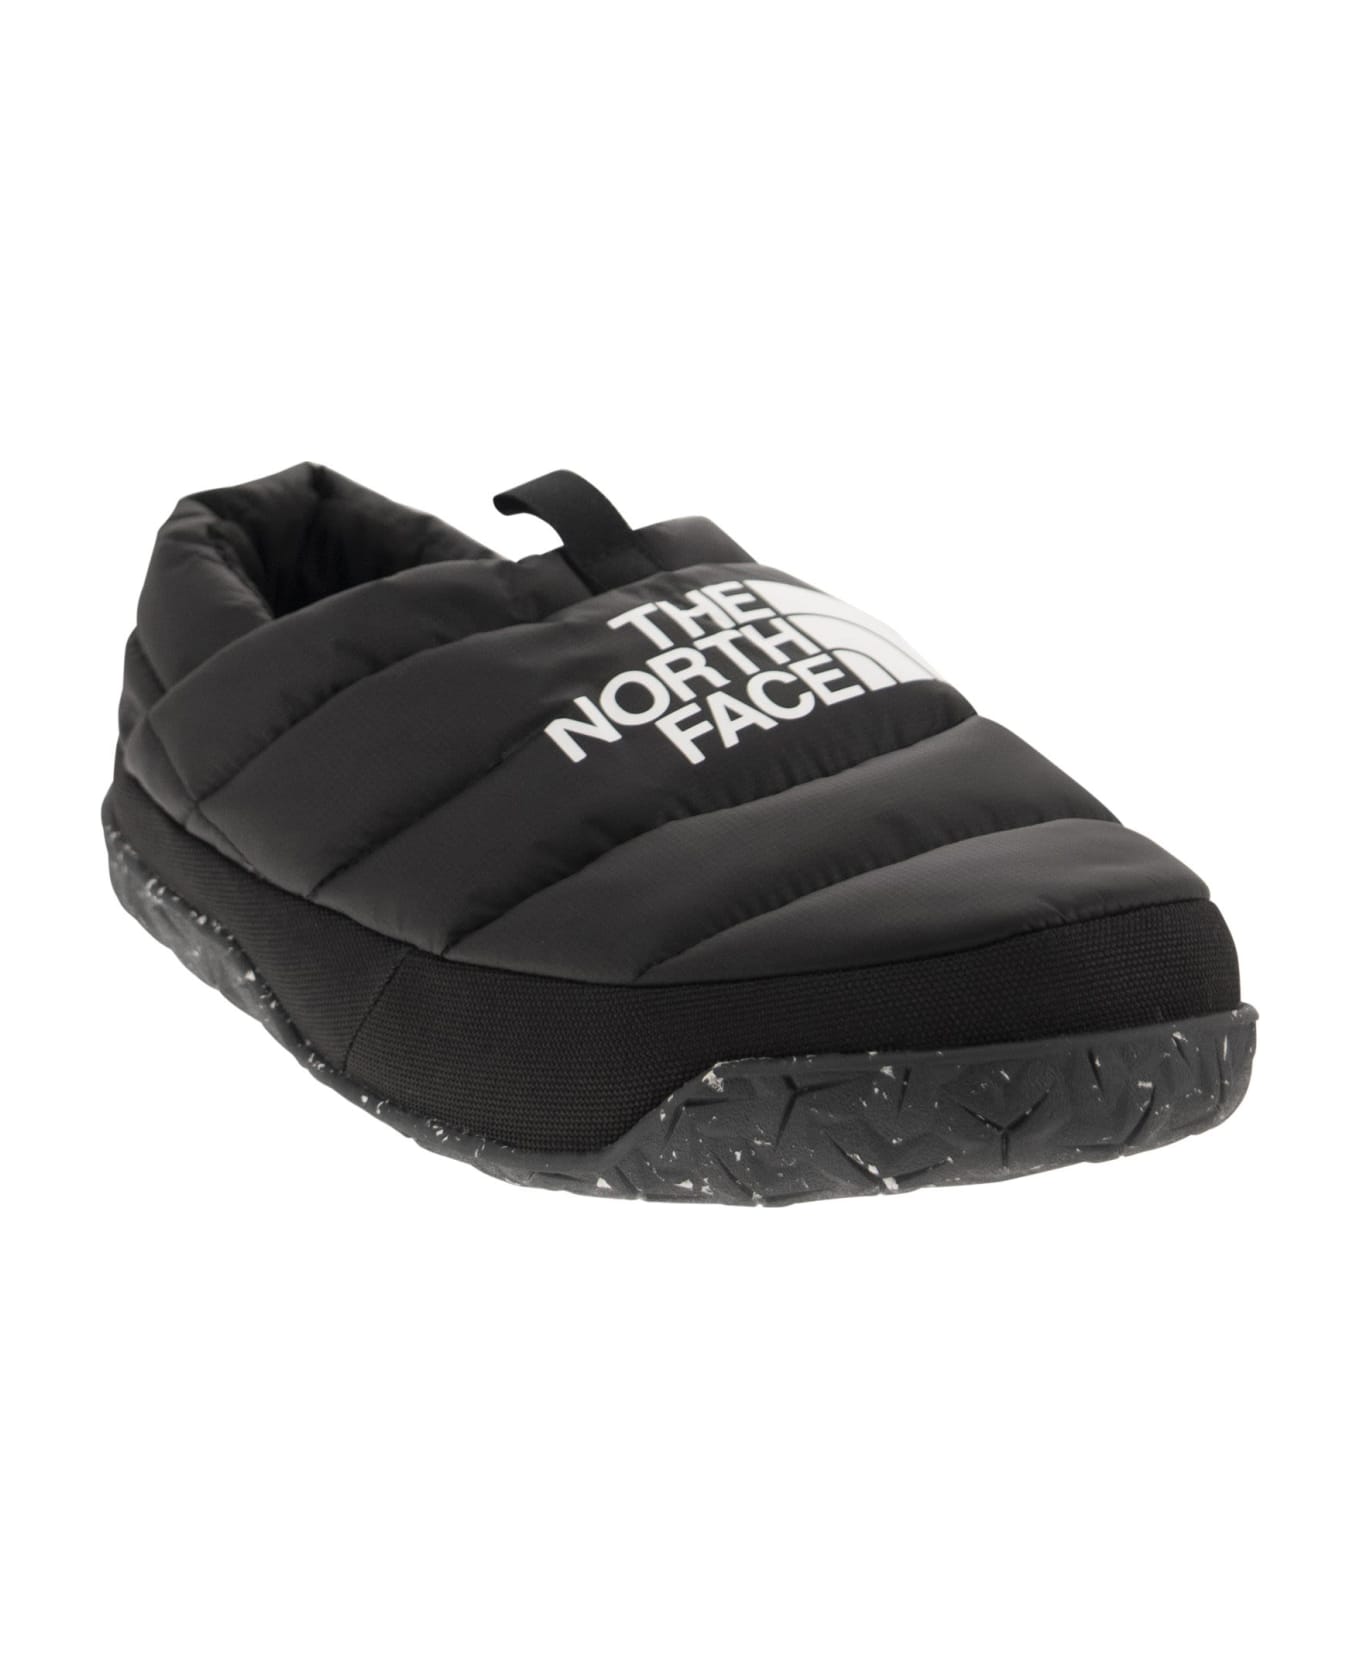 The North Face Nuptse - Winter Slippers - Black